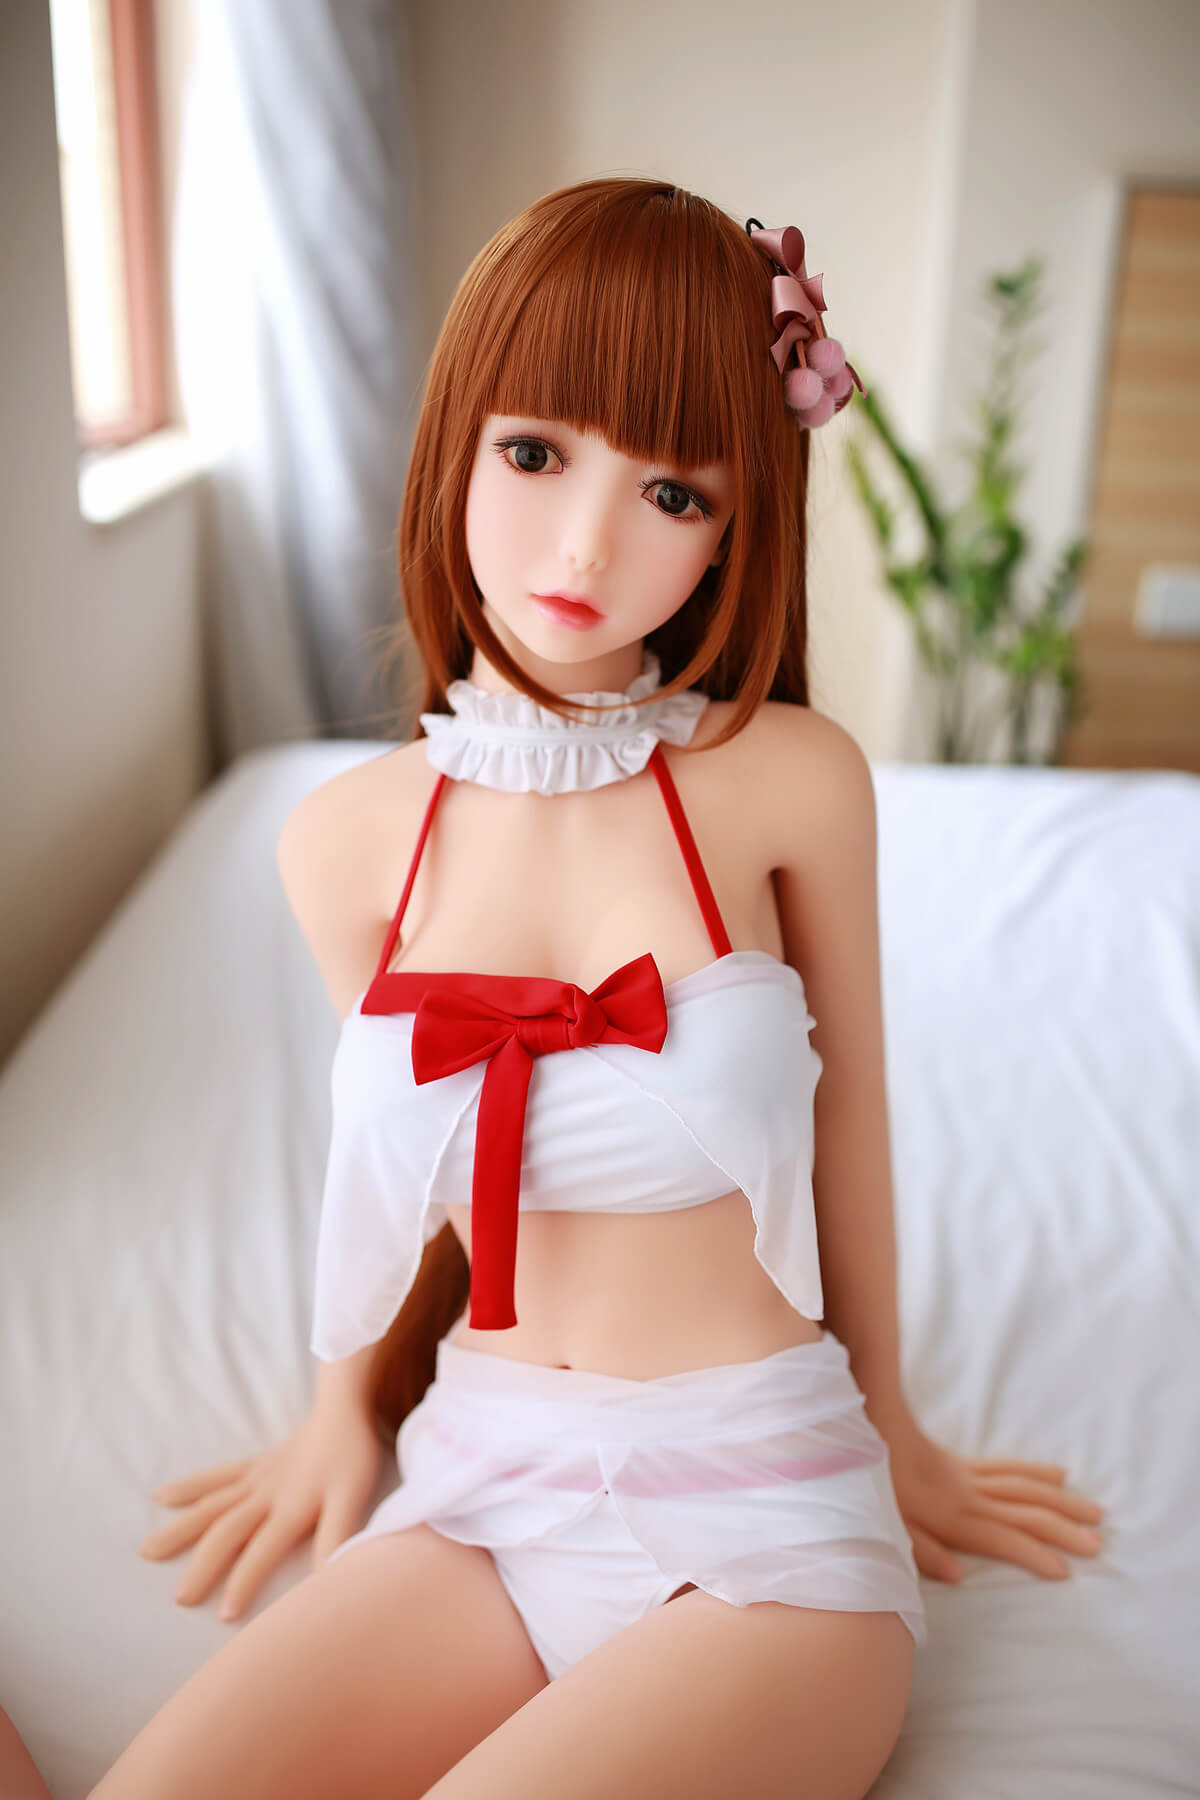 Realistic Anime Sex Doll On Sale